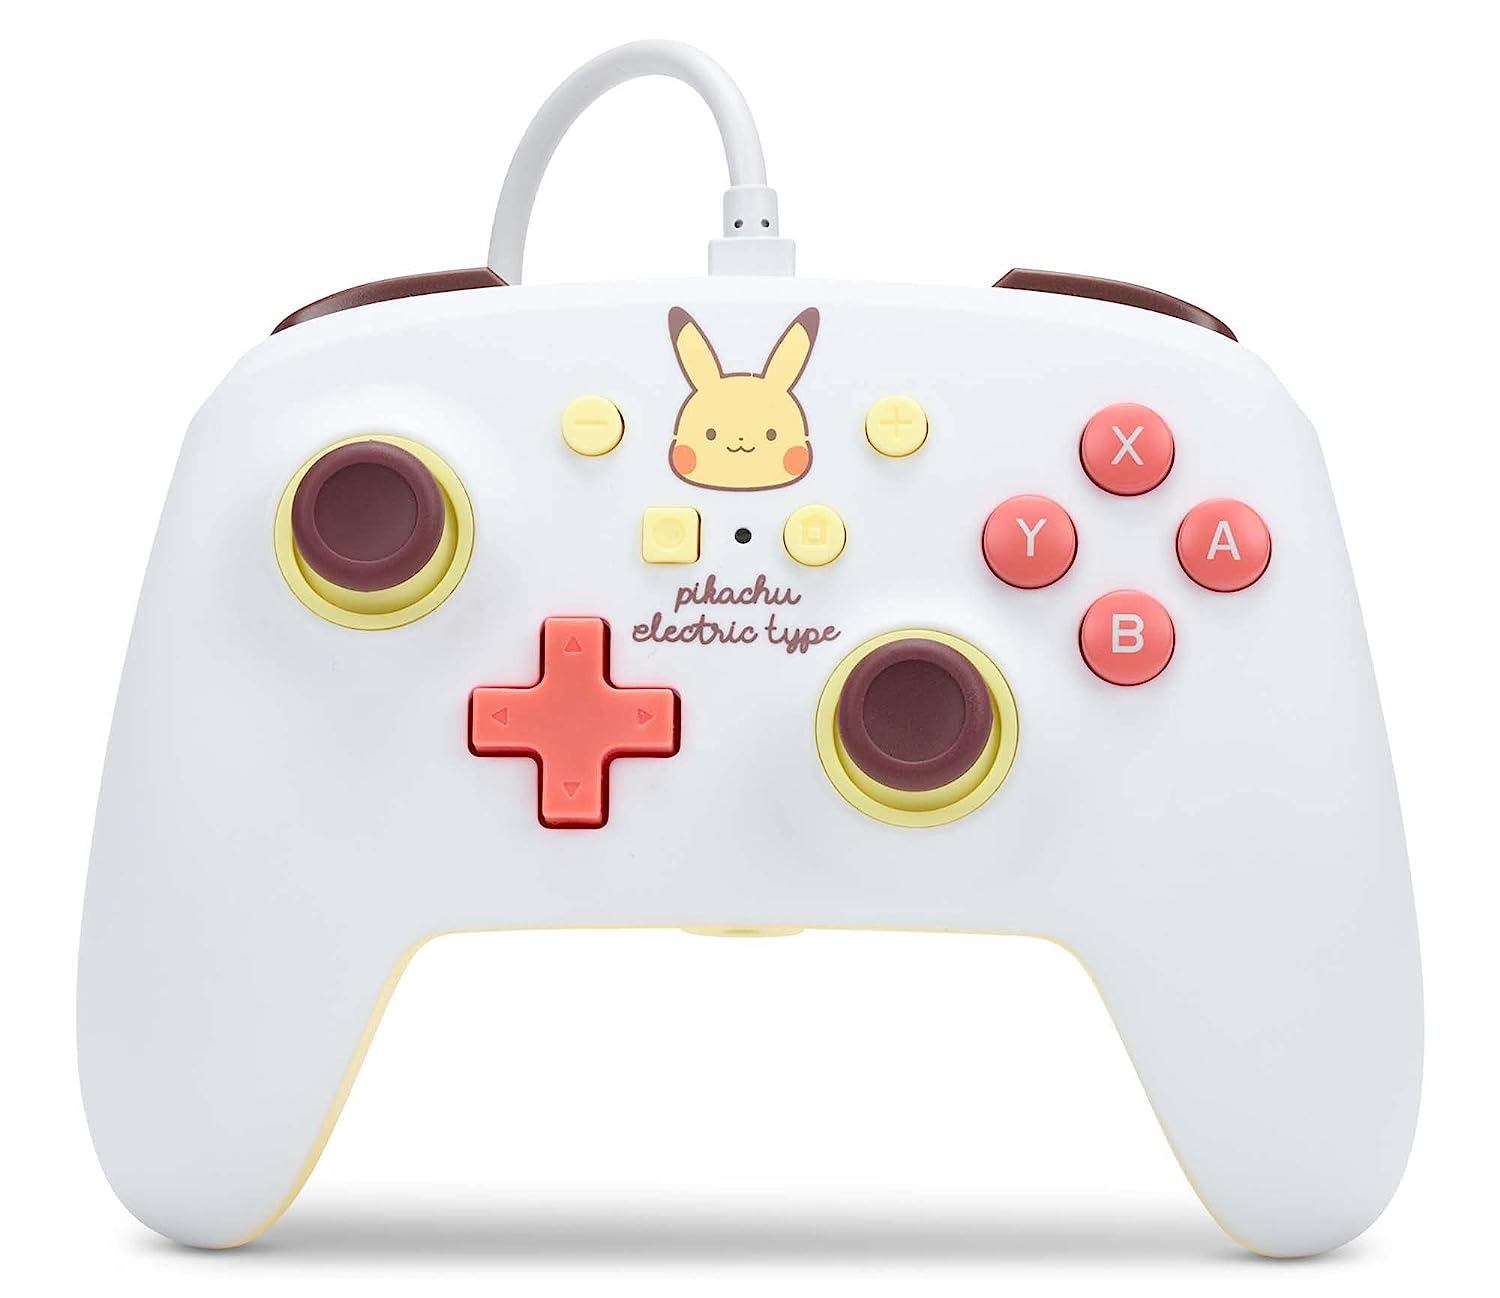 PowerA Enhanced Wired Controller for Nintendo Switch (Pikachu Electric) $12 + Free Shipping w/ Prime or on orders over $25